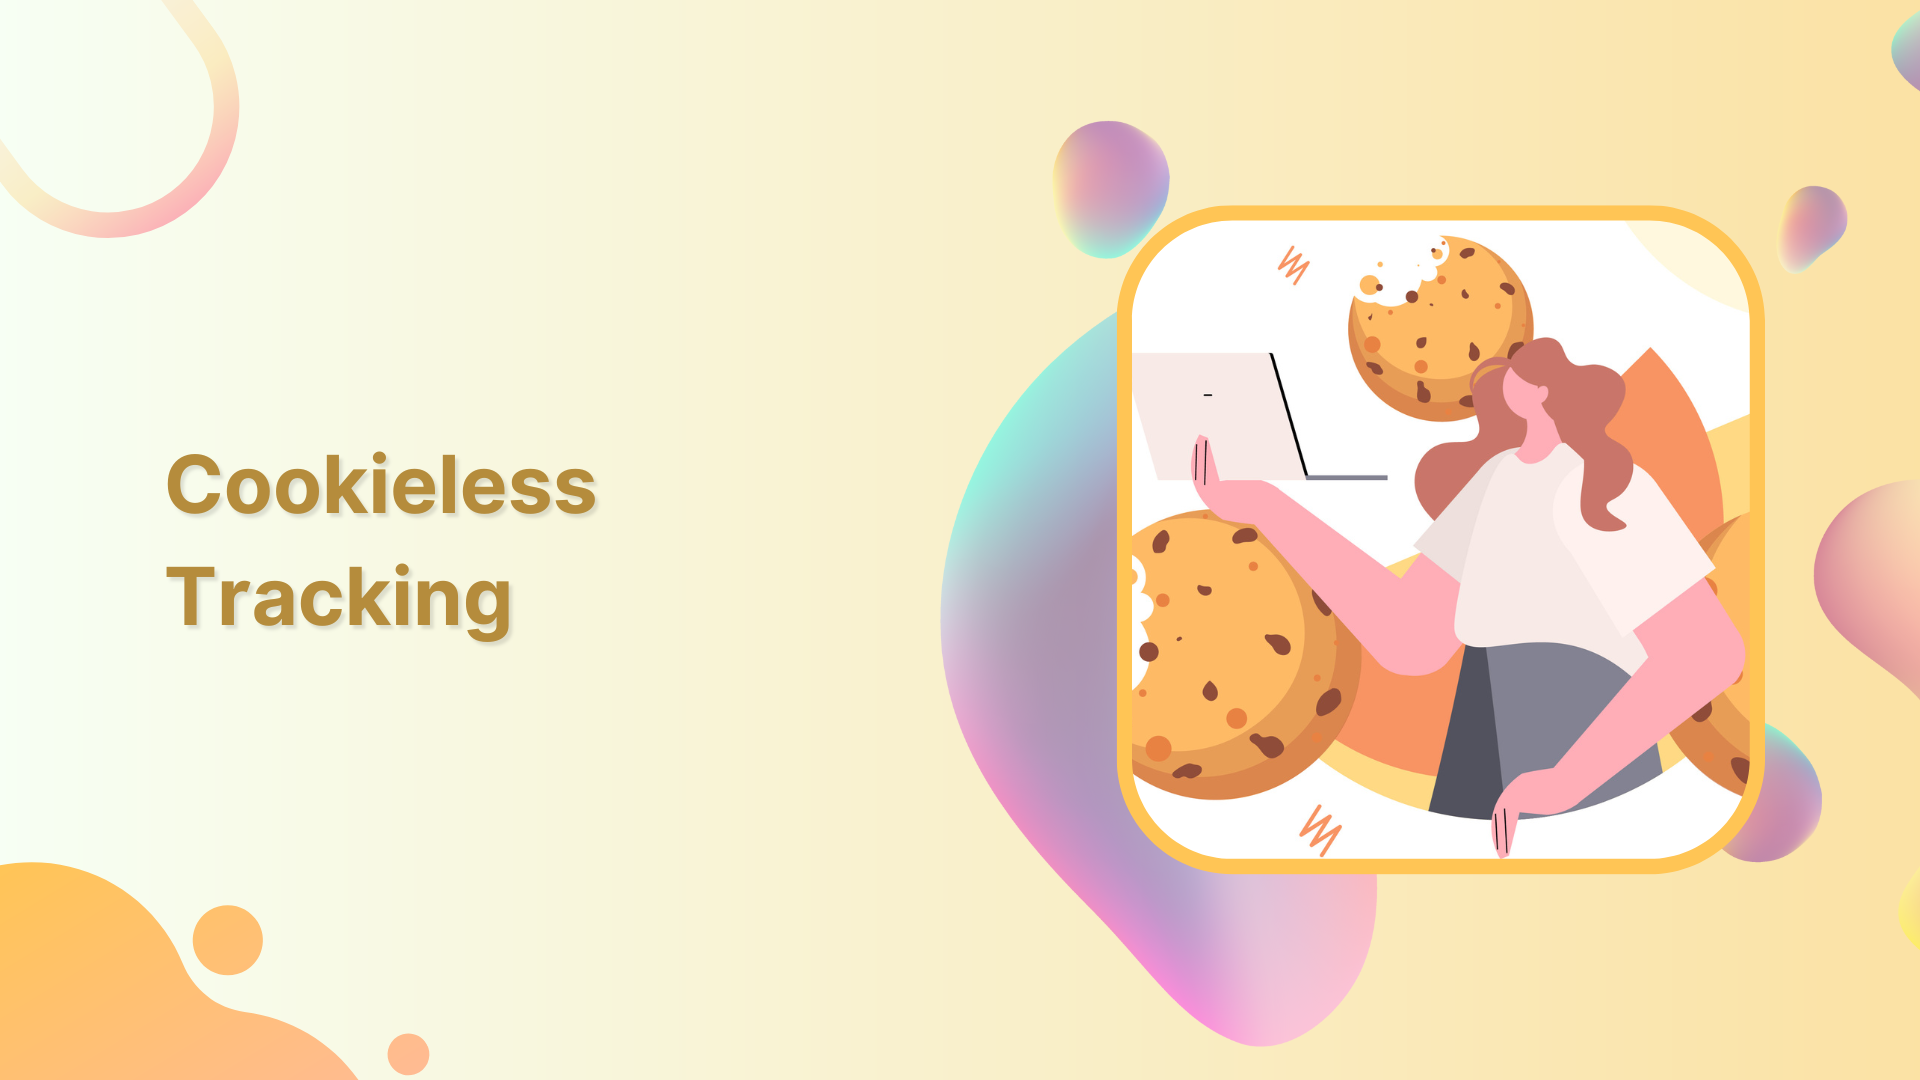 What Is Cookieless Tracking & How Will It Impact Businesses